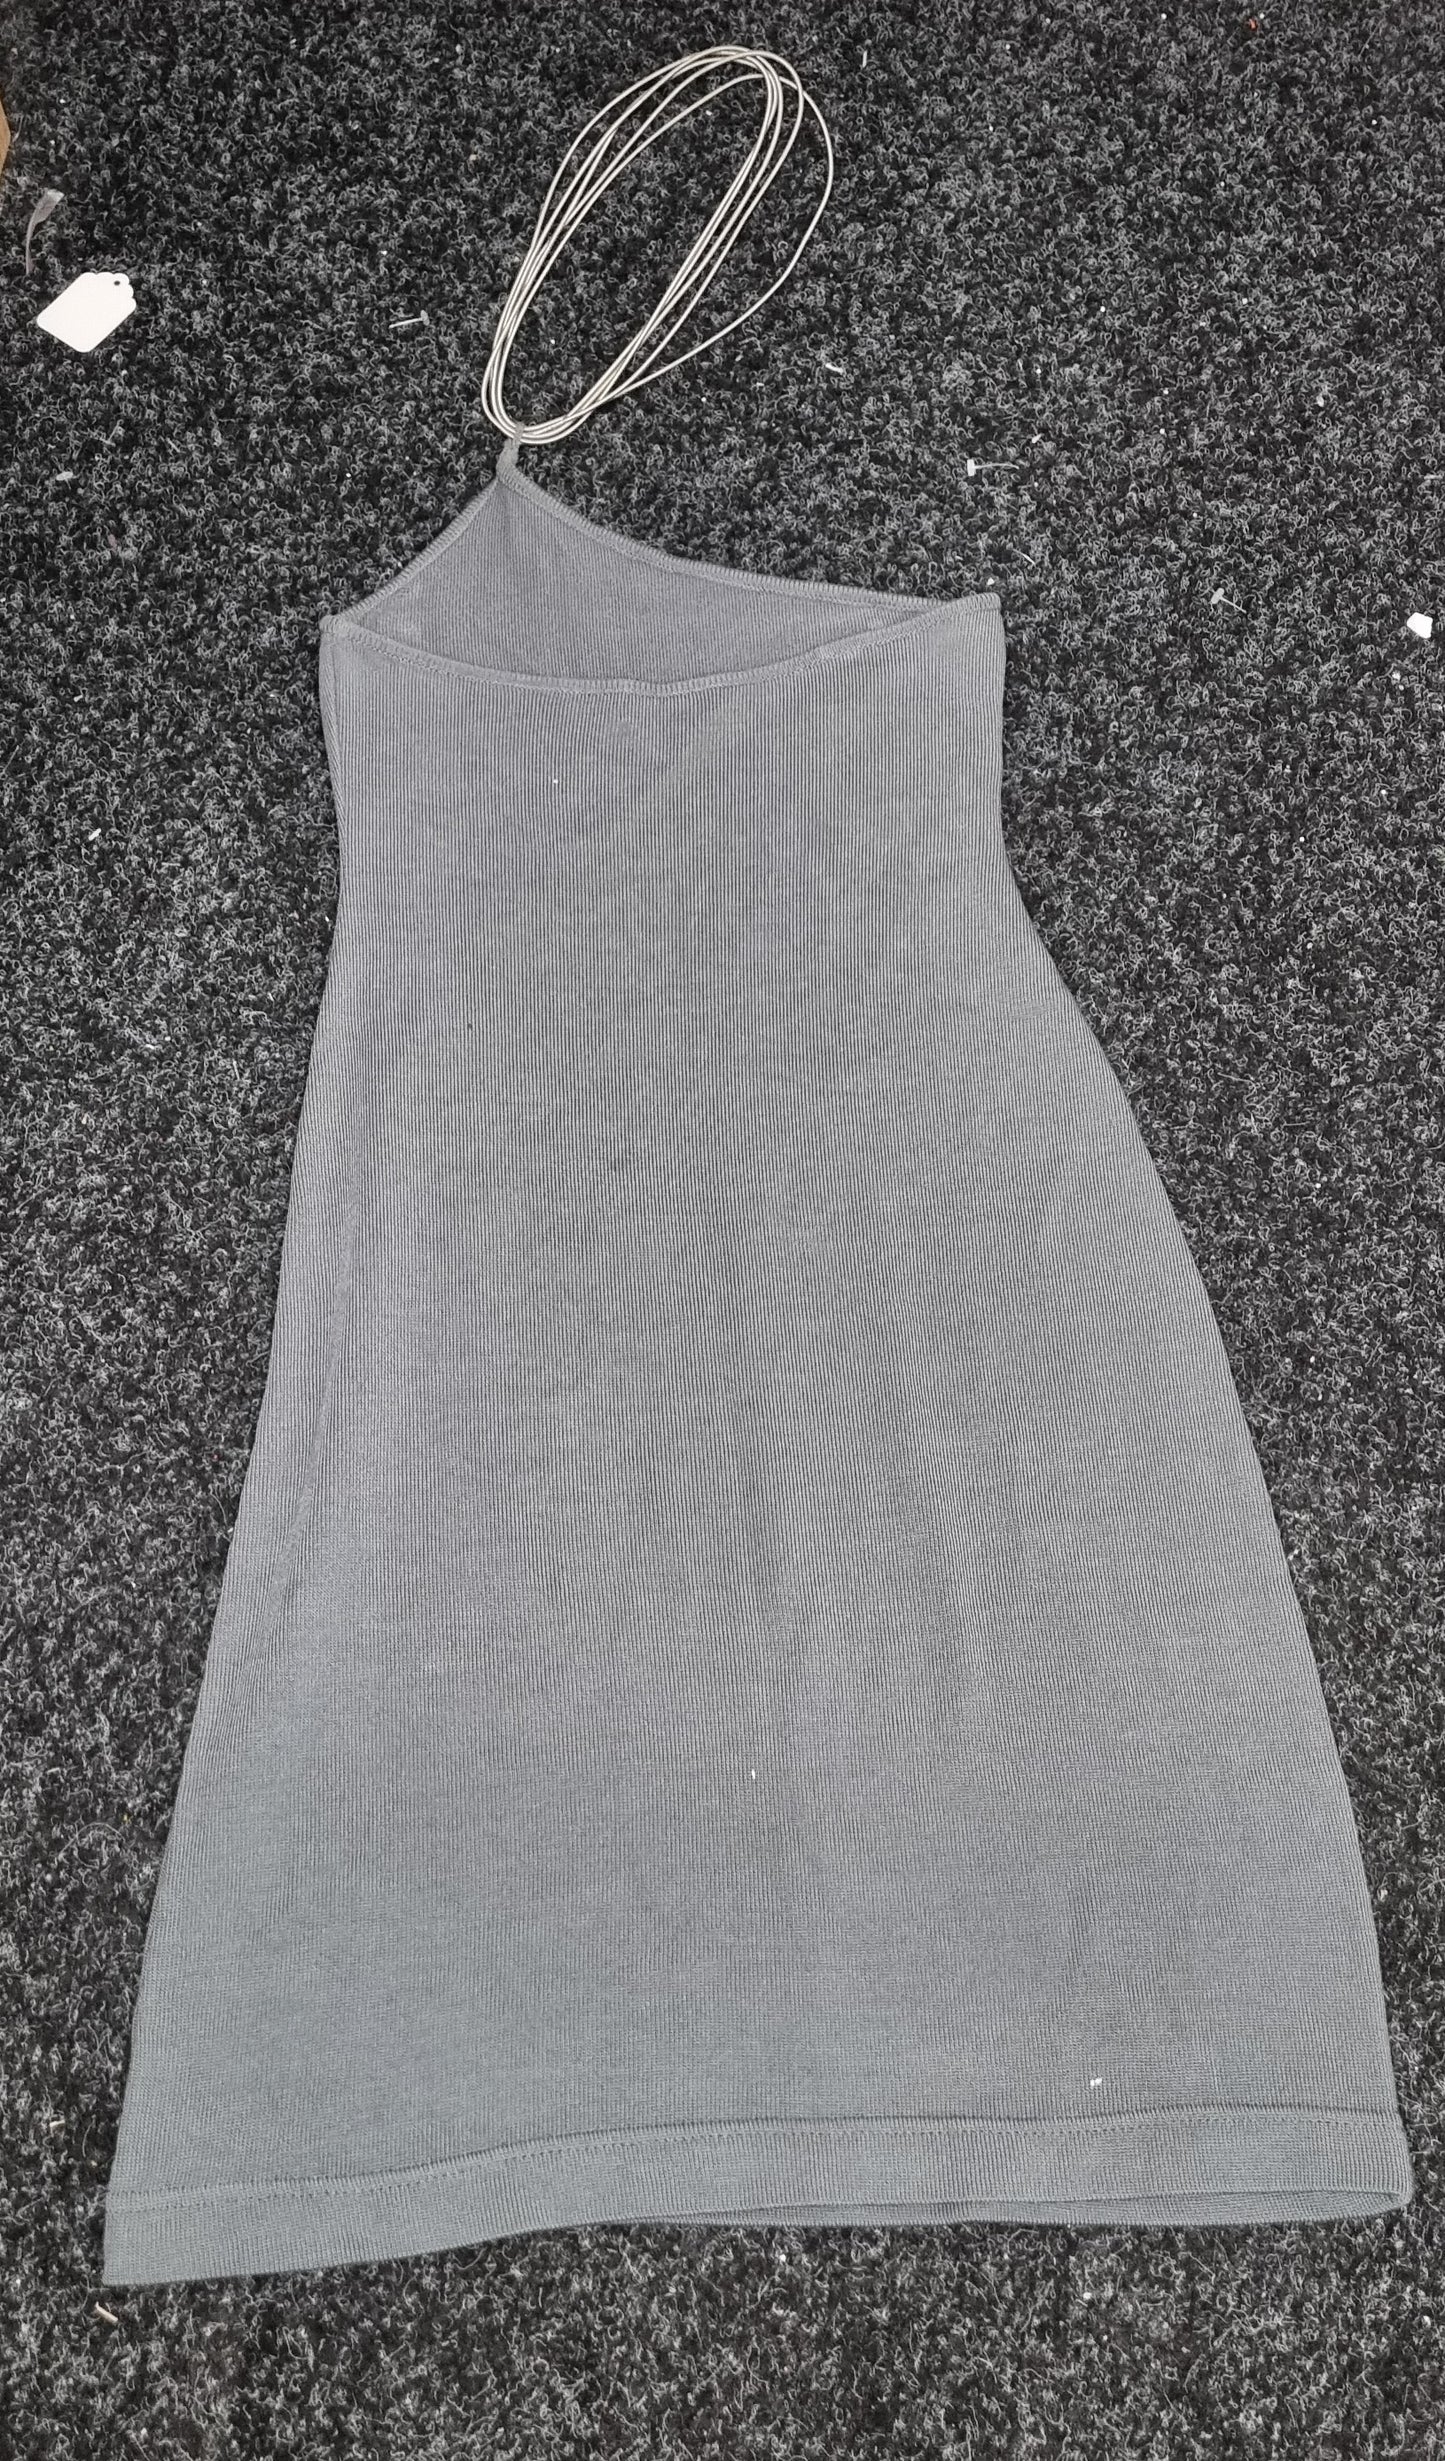 Amara Arzuaga One Shoulder Grey Stretchy Knitted Mini Dress with Silver Detail Size 38